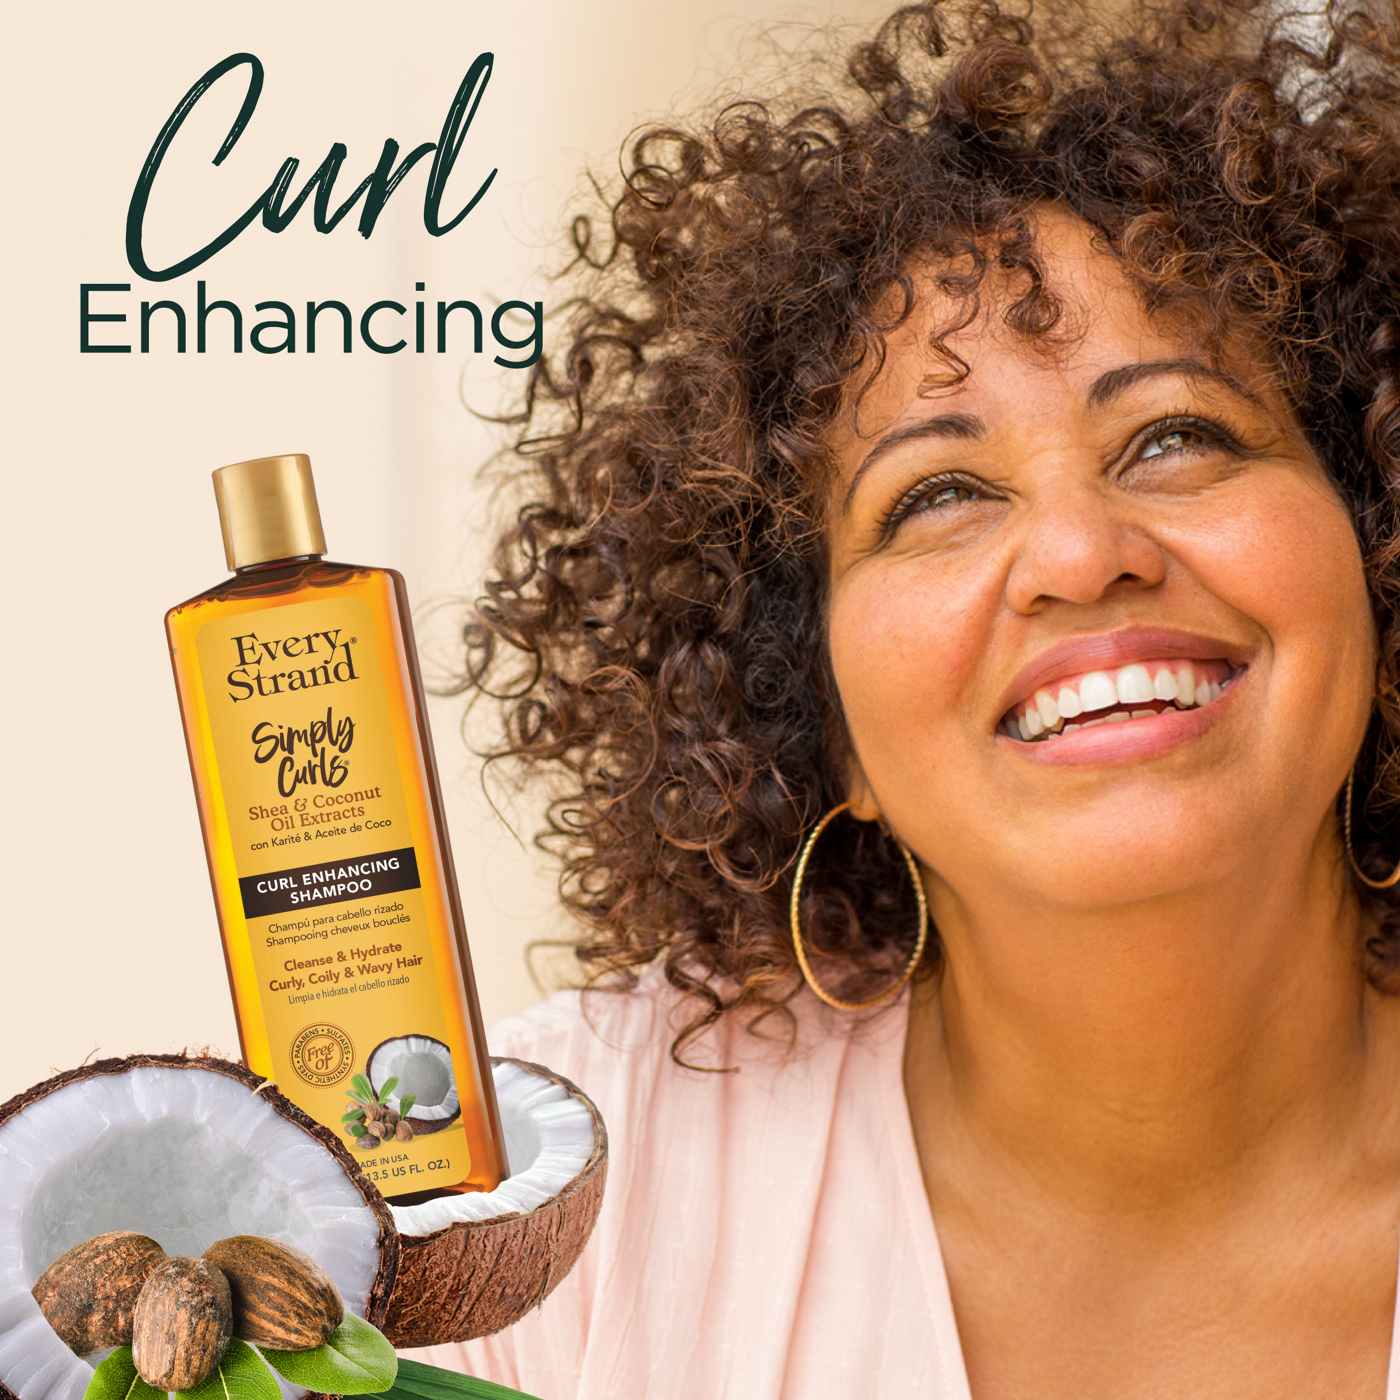 Every Strand Simply Curls Curl Enhancing - Shampoo & Conditioner at H-E-B